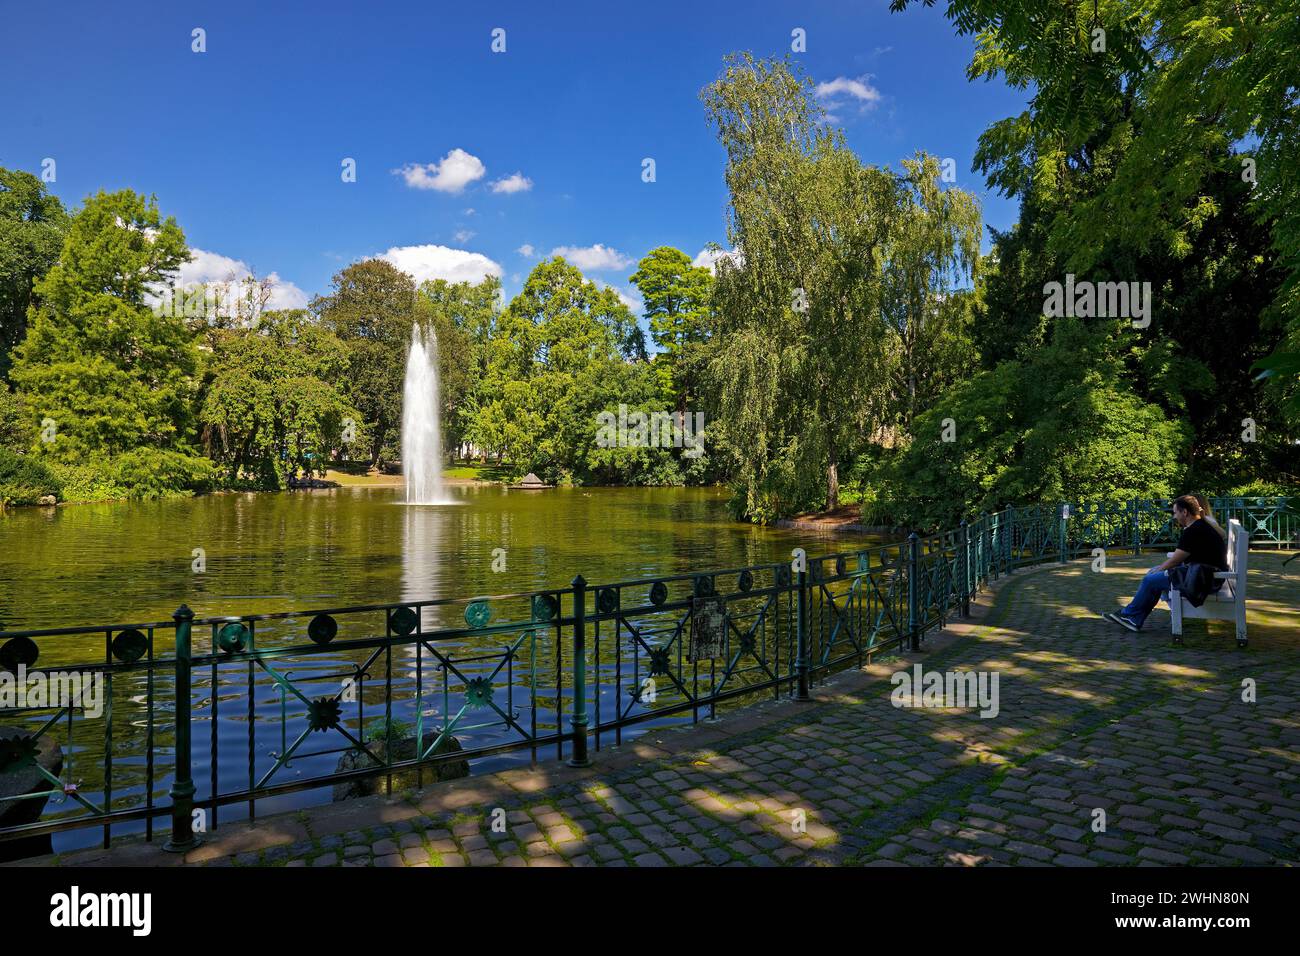 Fountain in the pond, Warmer Damm Landscape Park, Wiesbaden, Hesse, Germany, Europe Stock Photo